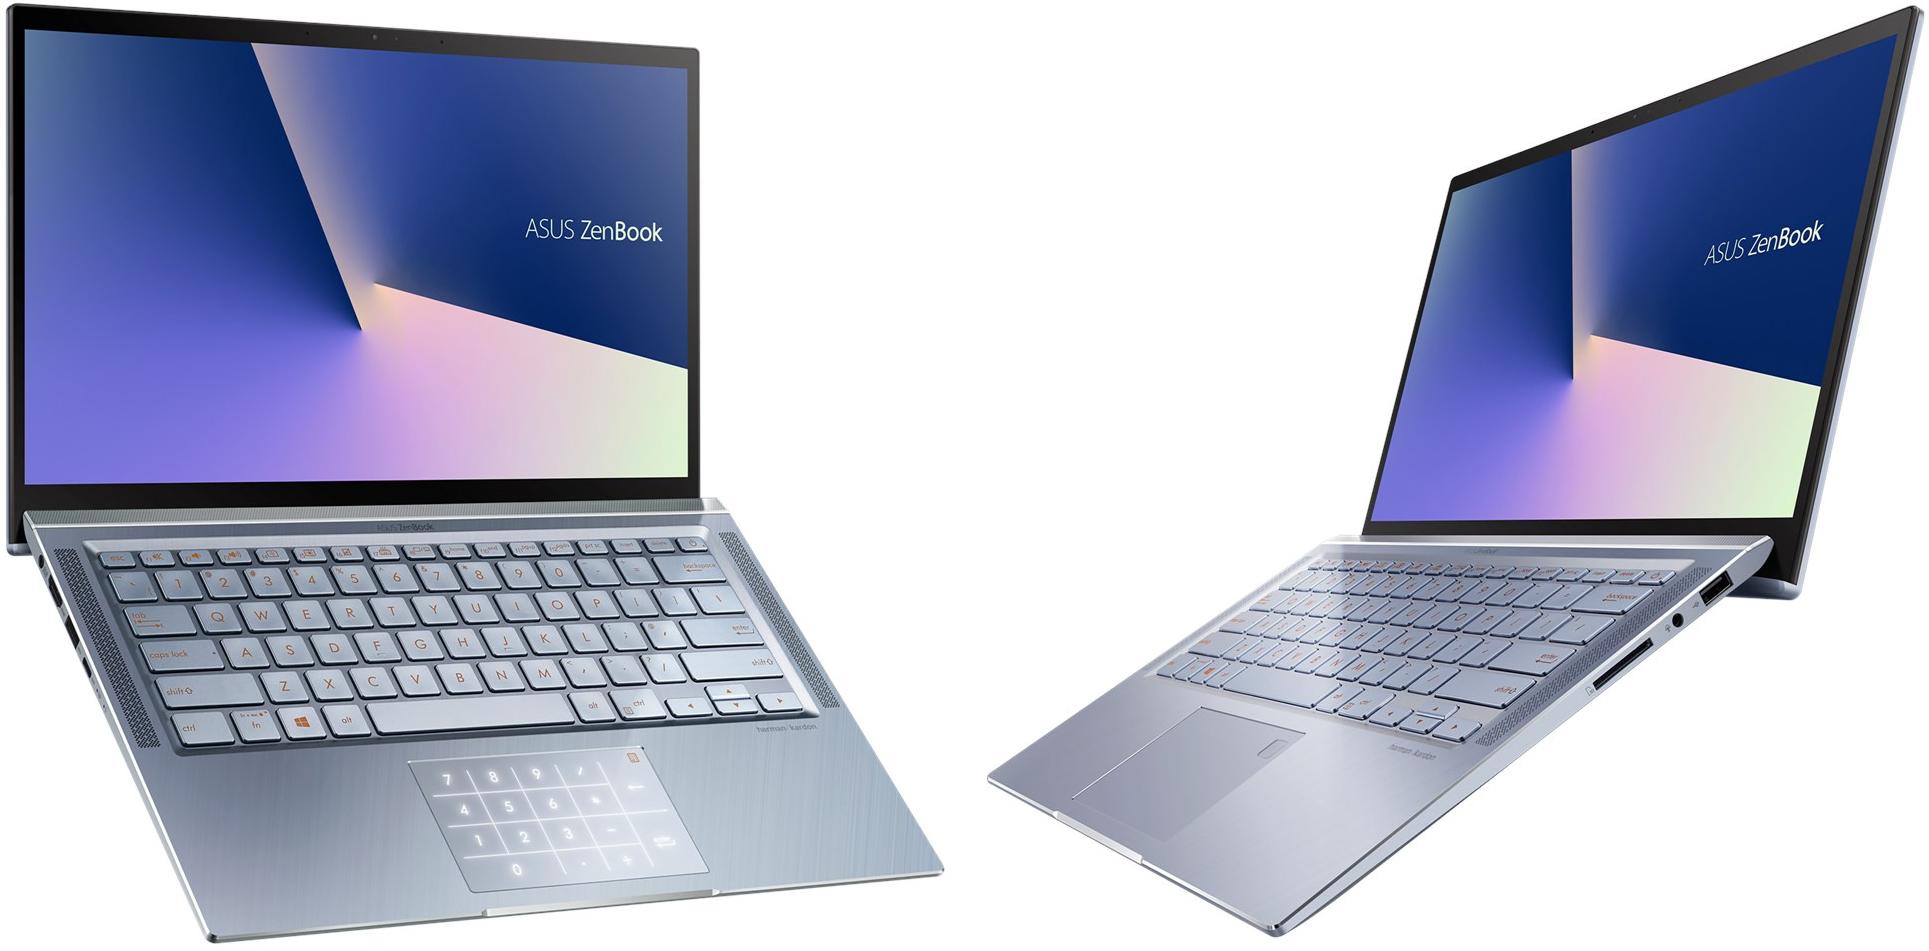 ASUS Launches AMD Ryzen-Based ZenBooks: Two Laptops &amp; a Convertible